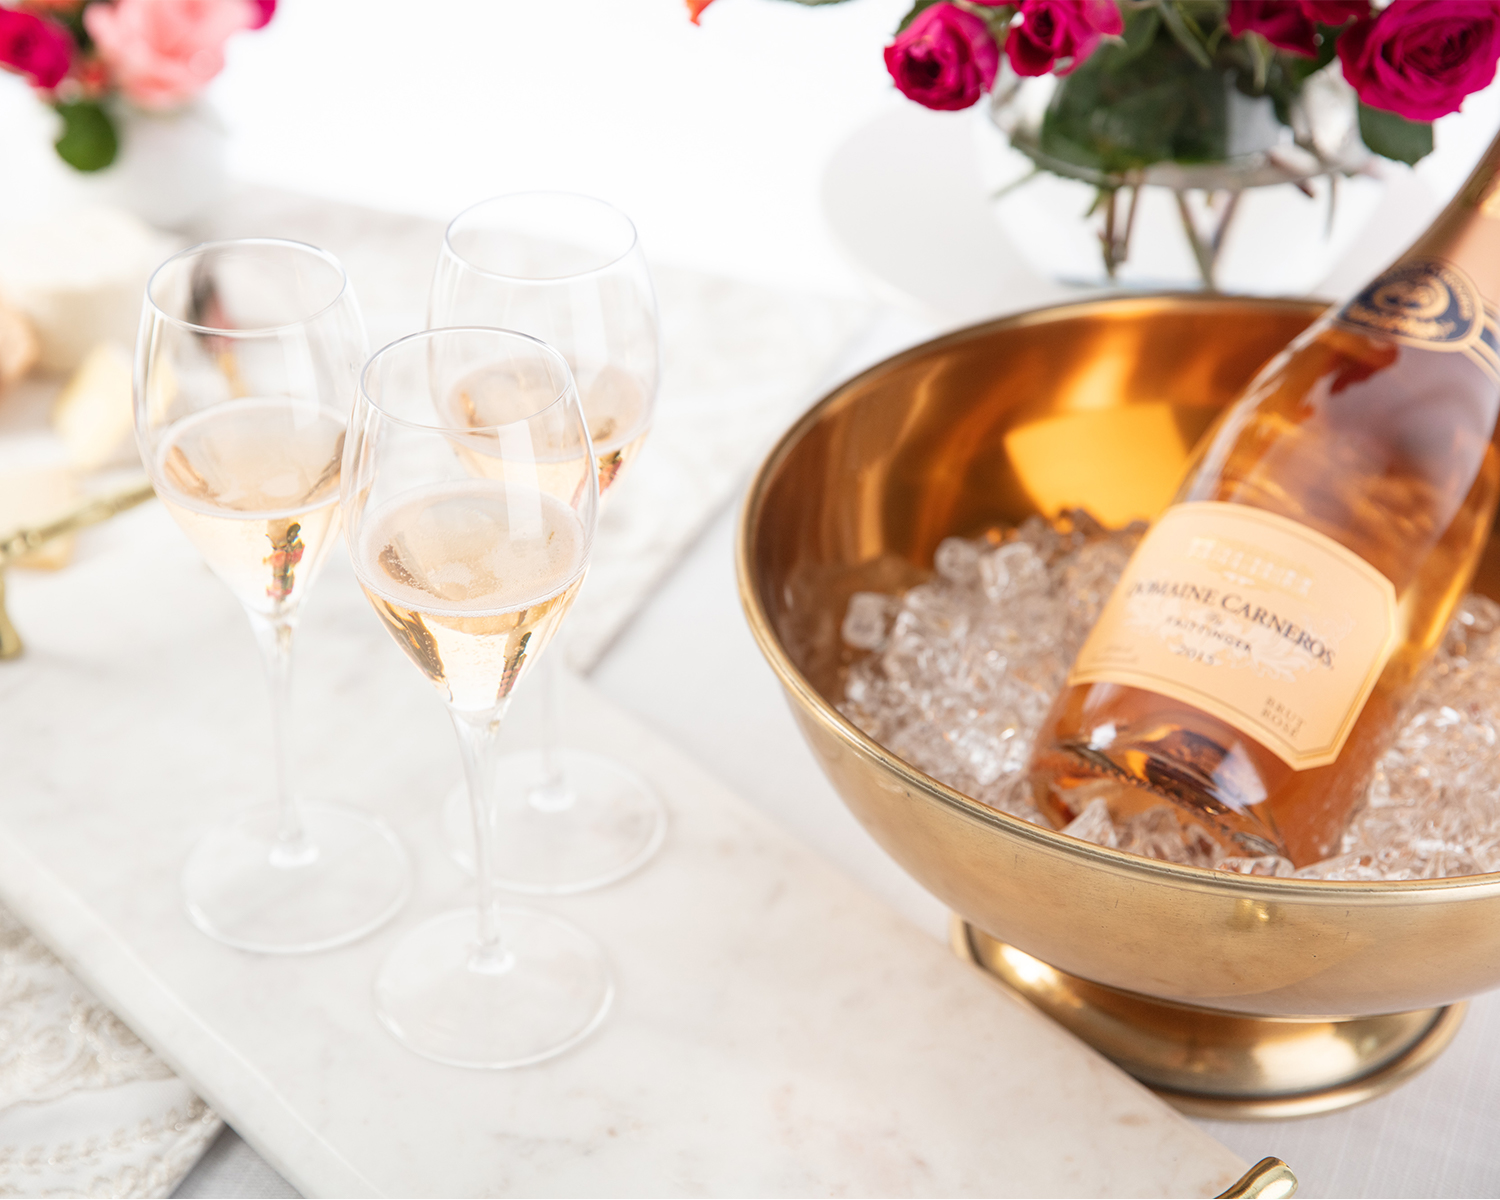 Rosé sparkling wine in a gold ice bucket with three flutes of wine next to it